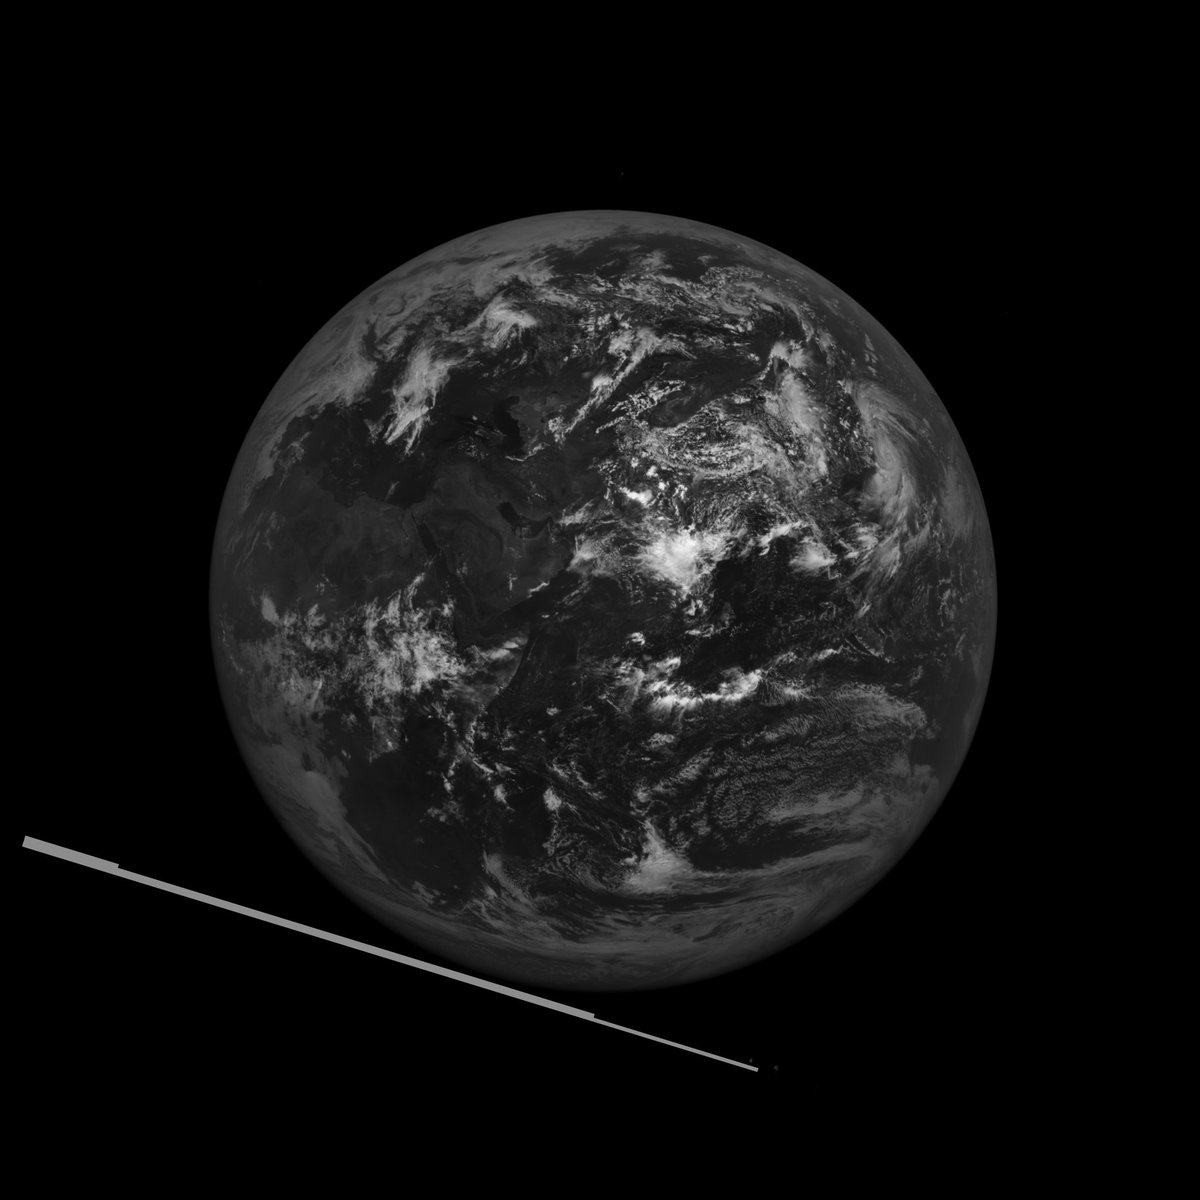 Image received this afternoon from #DSCOVR at 1.43 Million Kilometer distance @SternwarteBO in High Rate Link with #SatDump @aang254